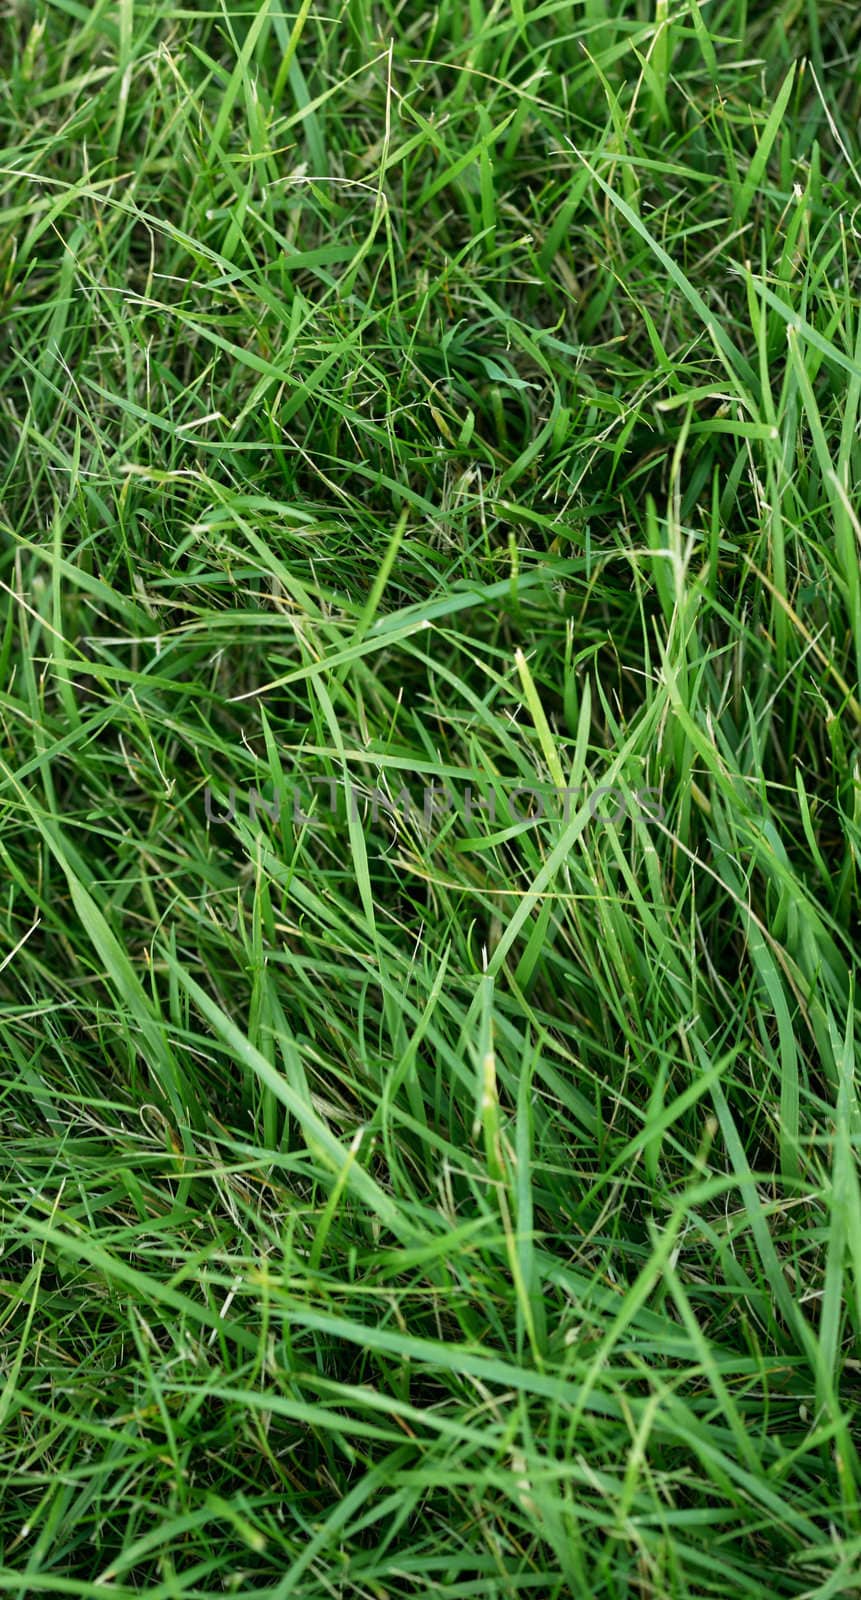 Very thick and dense green crab grass